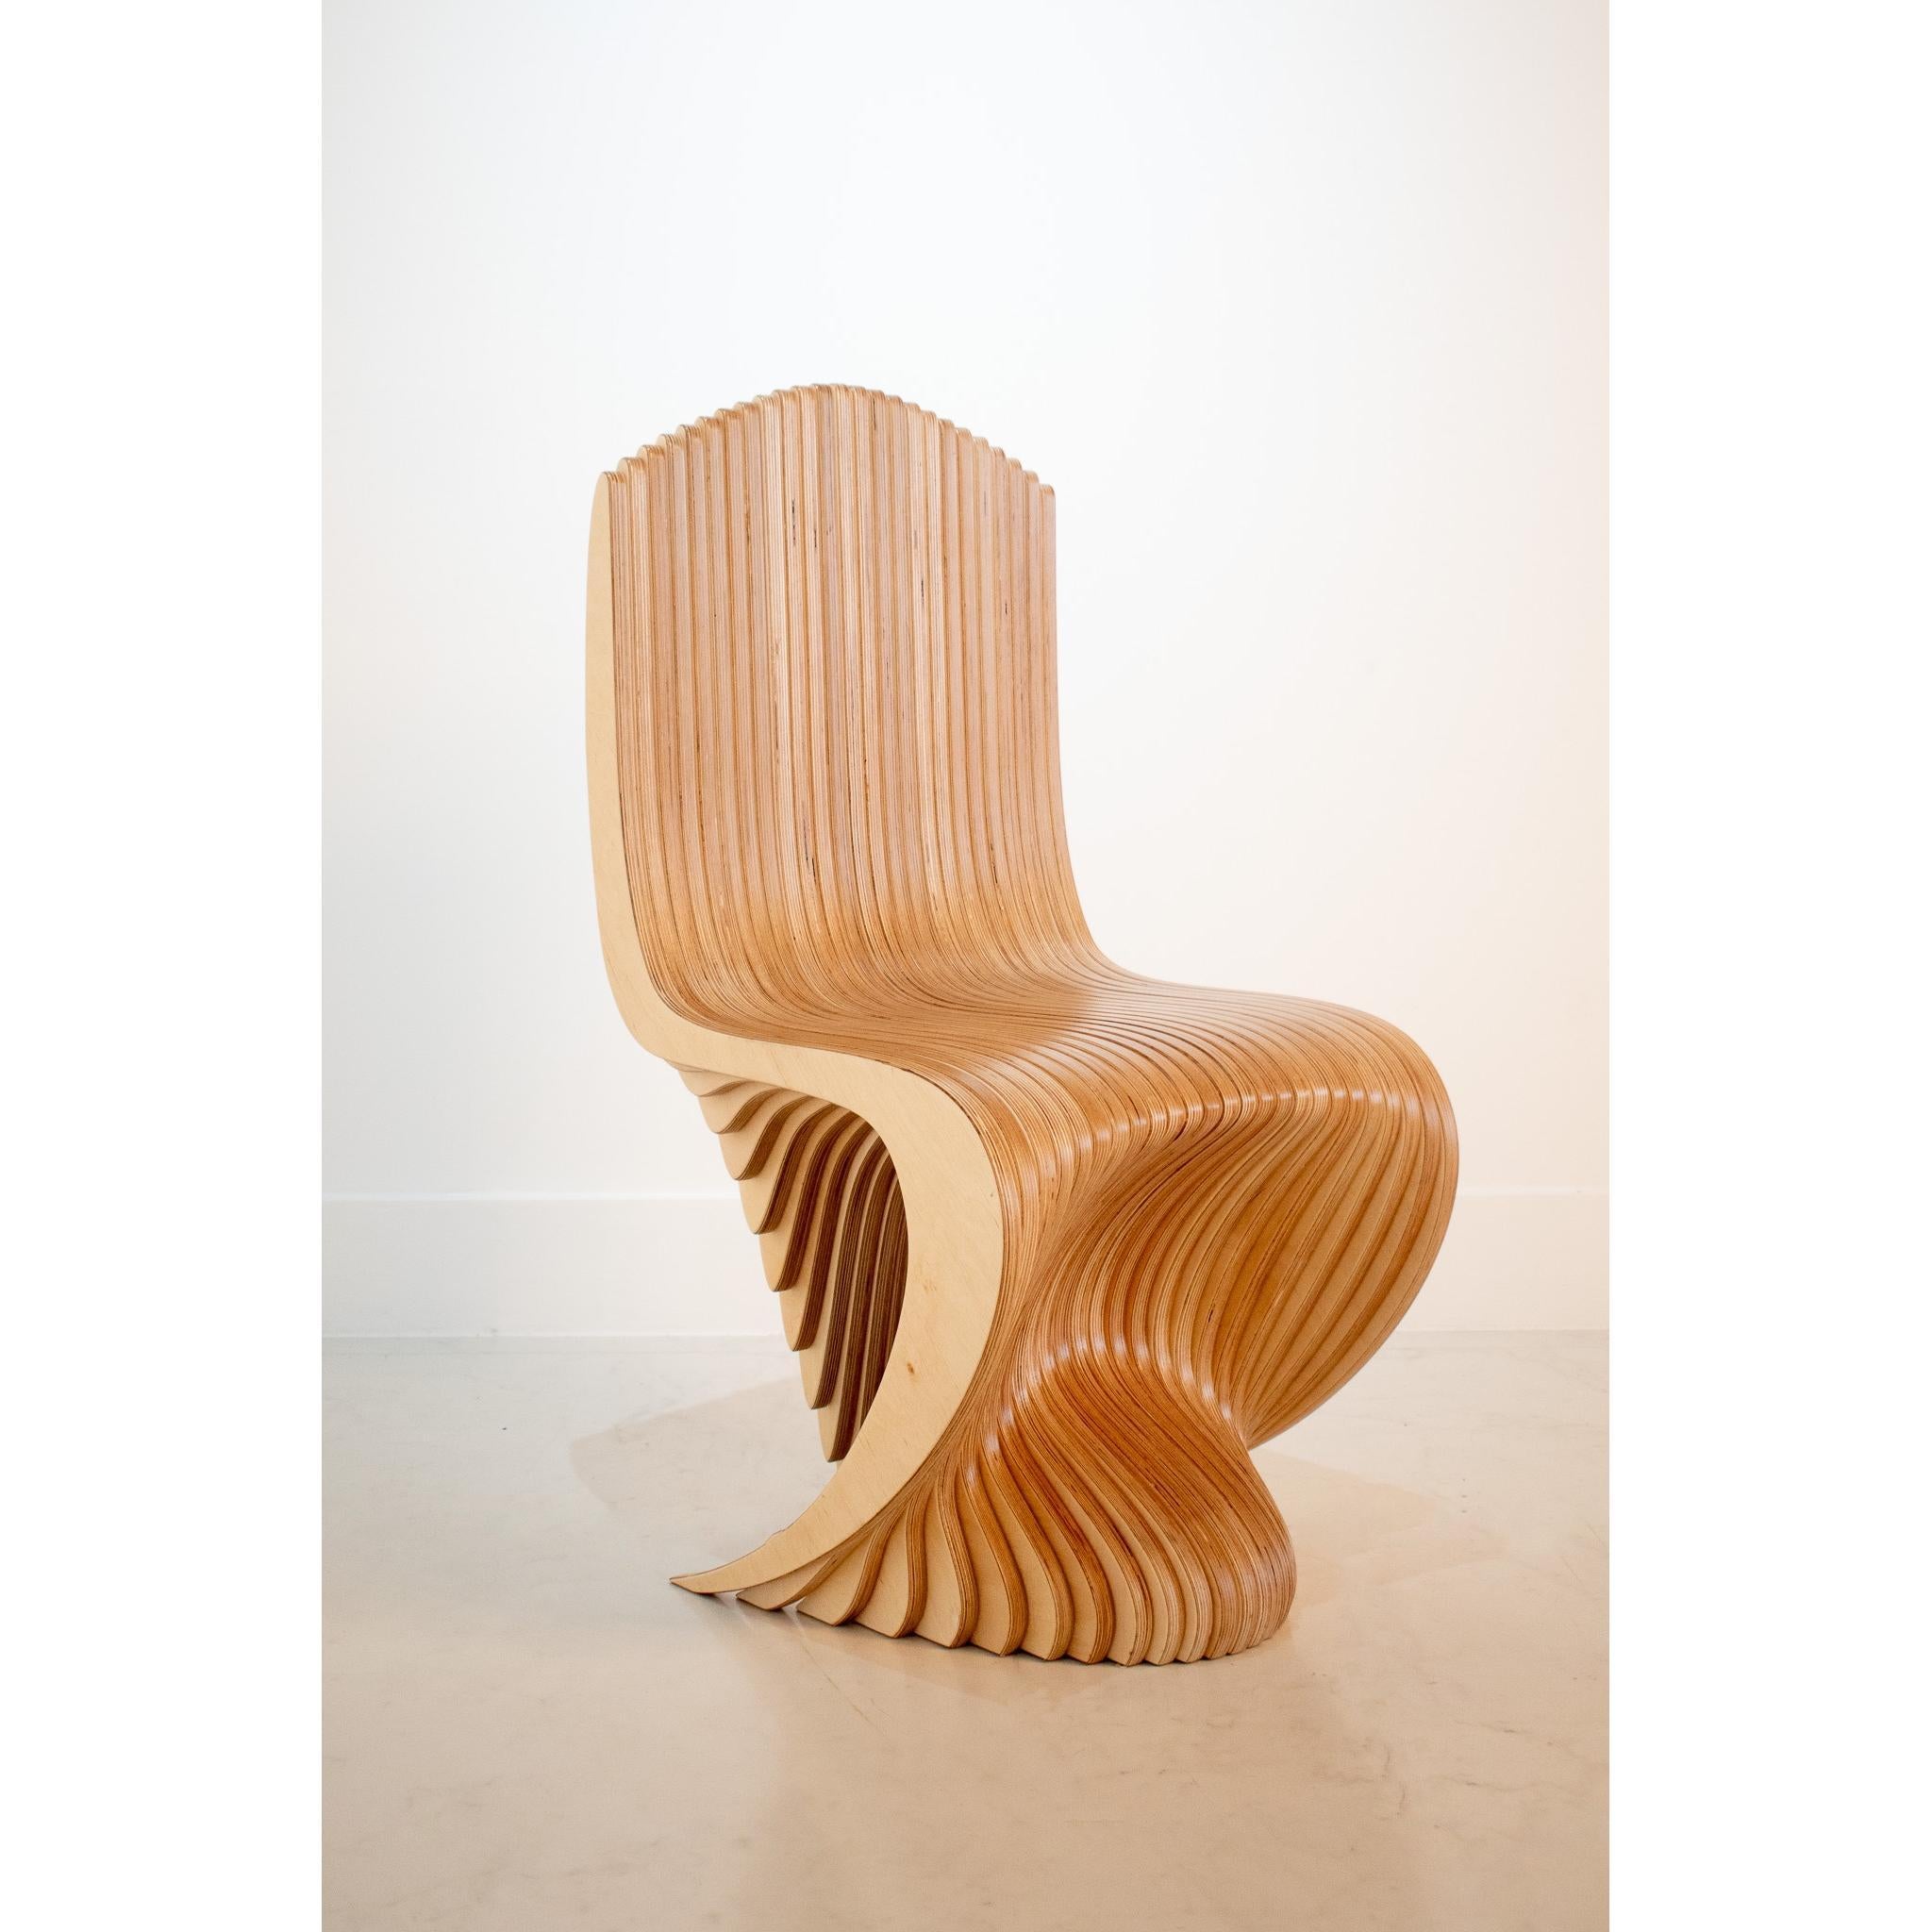 A contemporary dining Chair, handmade in the U.K by us at Antique Modern Mix, this collection of curvaceous furniture is made from Birch plywood which is FSC certified which means it is sourced from sustainably managed forests.

The collection